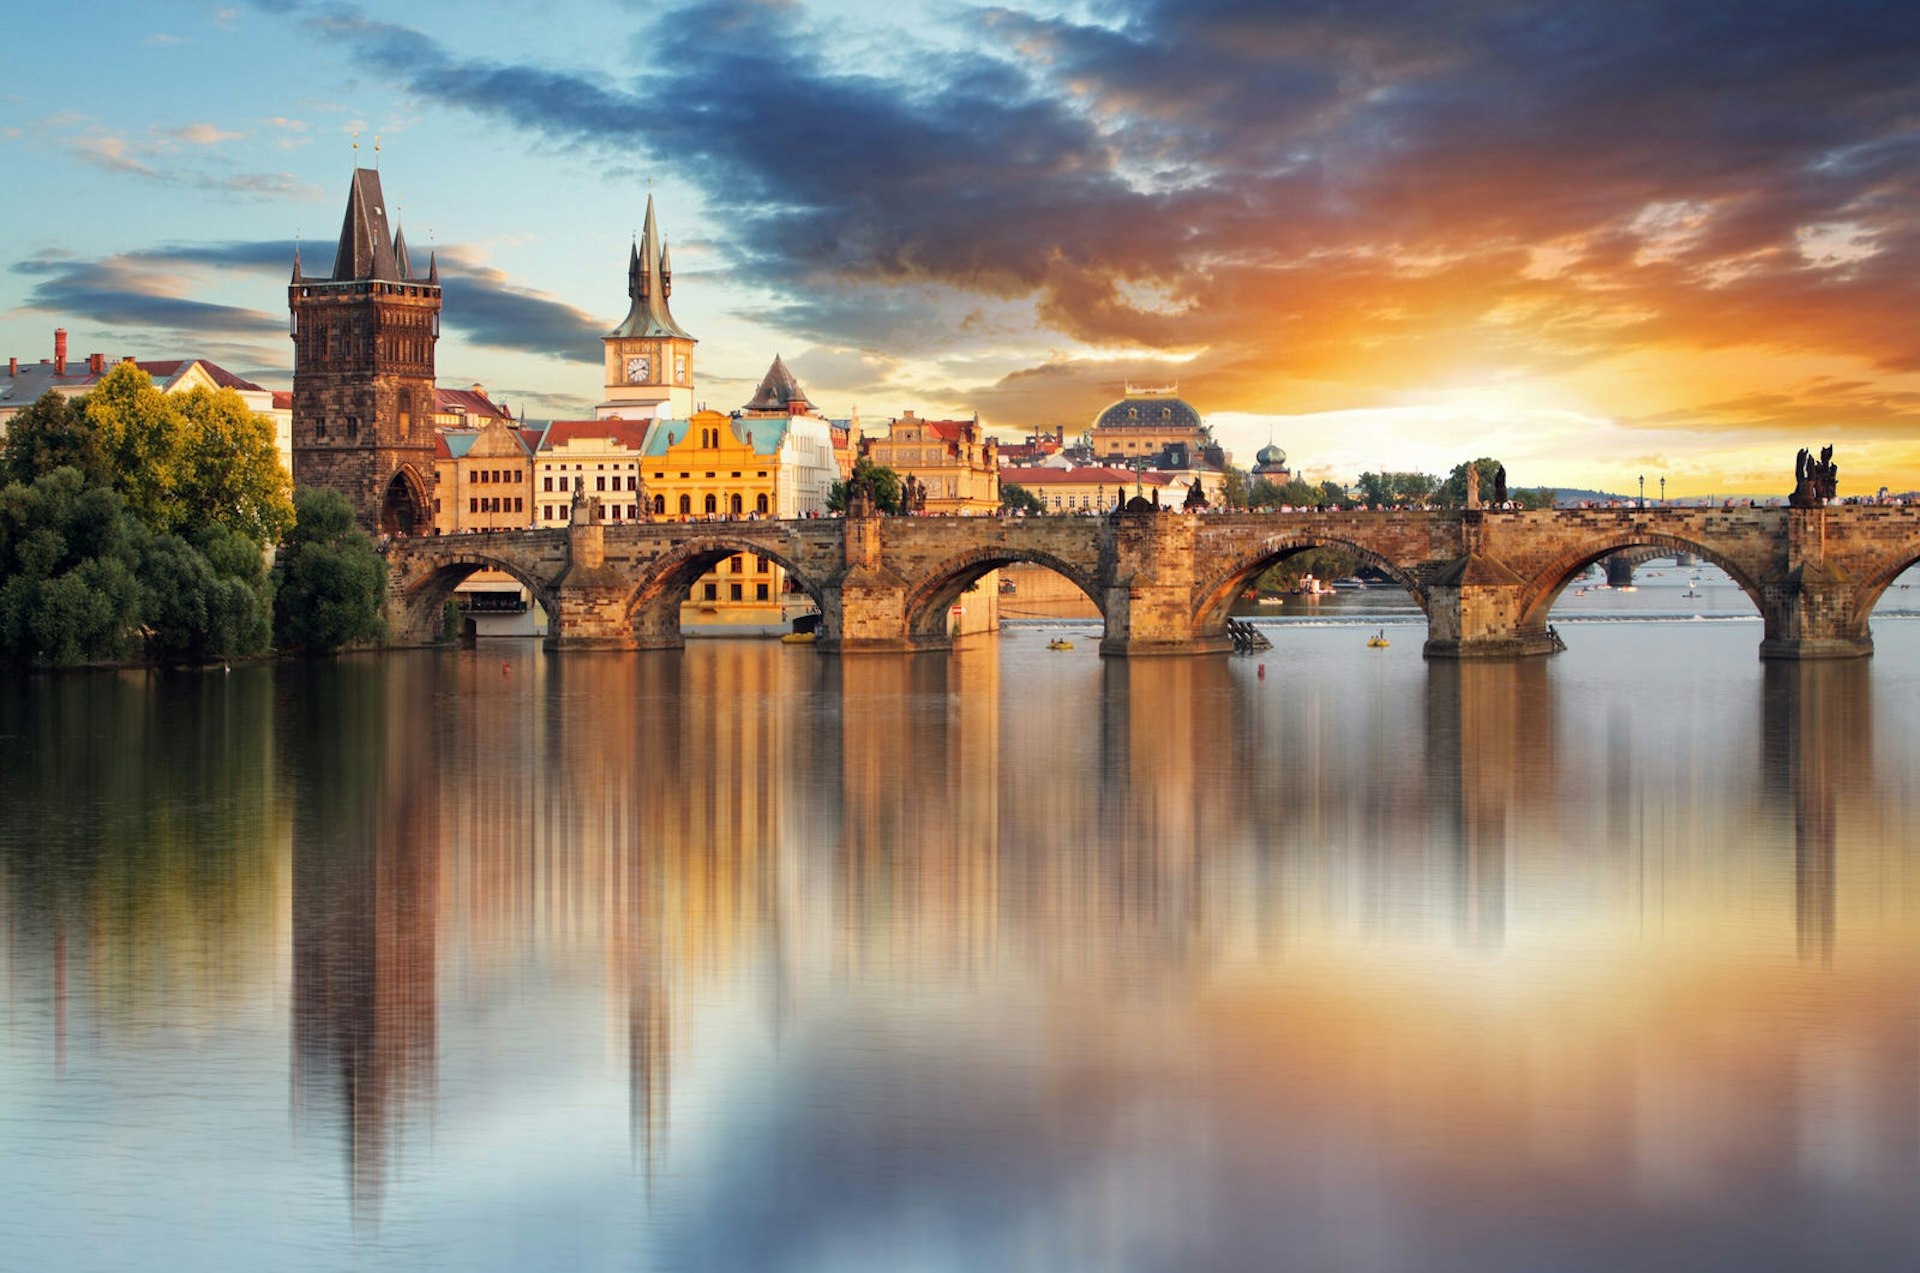 A panoramic shot along the river towards Charles Bridge, with the sun setting in a brilliant flash in the background; a dark cloud looms just above the sun